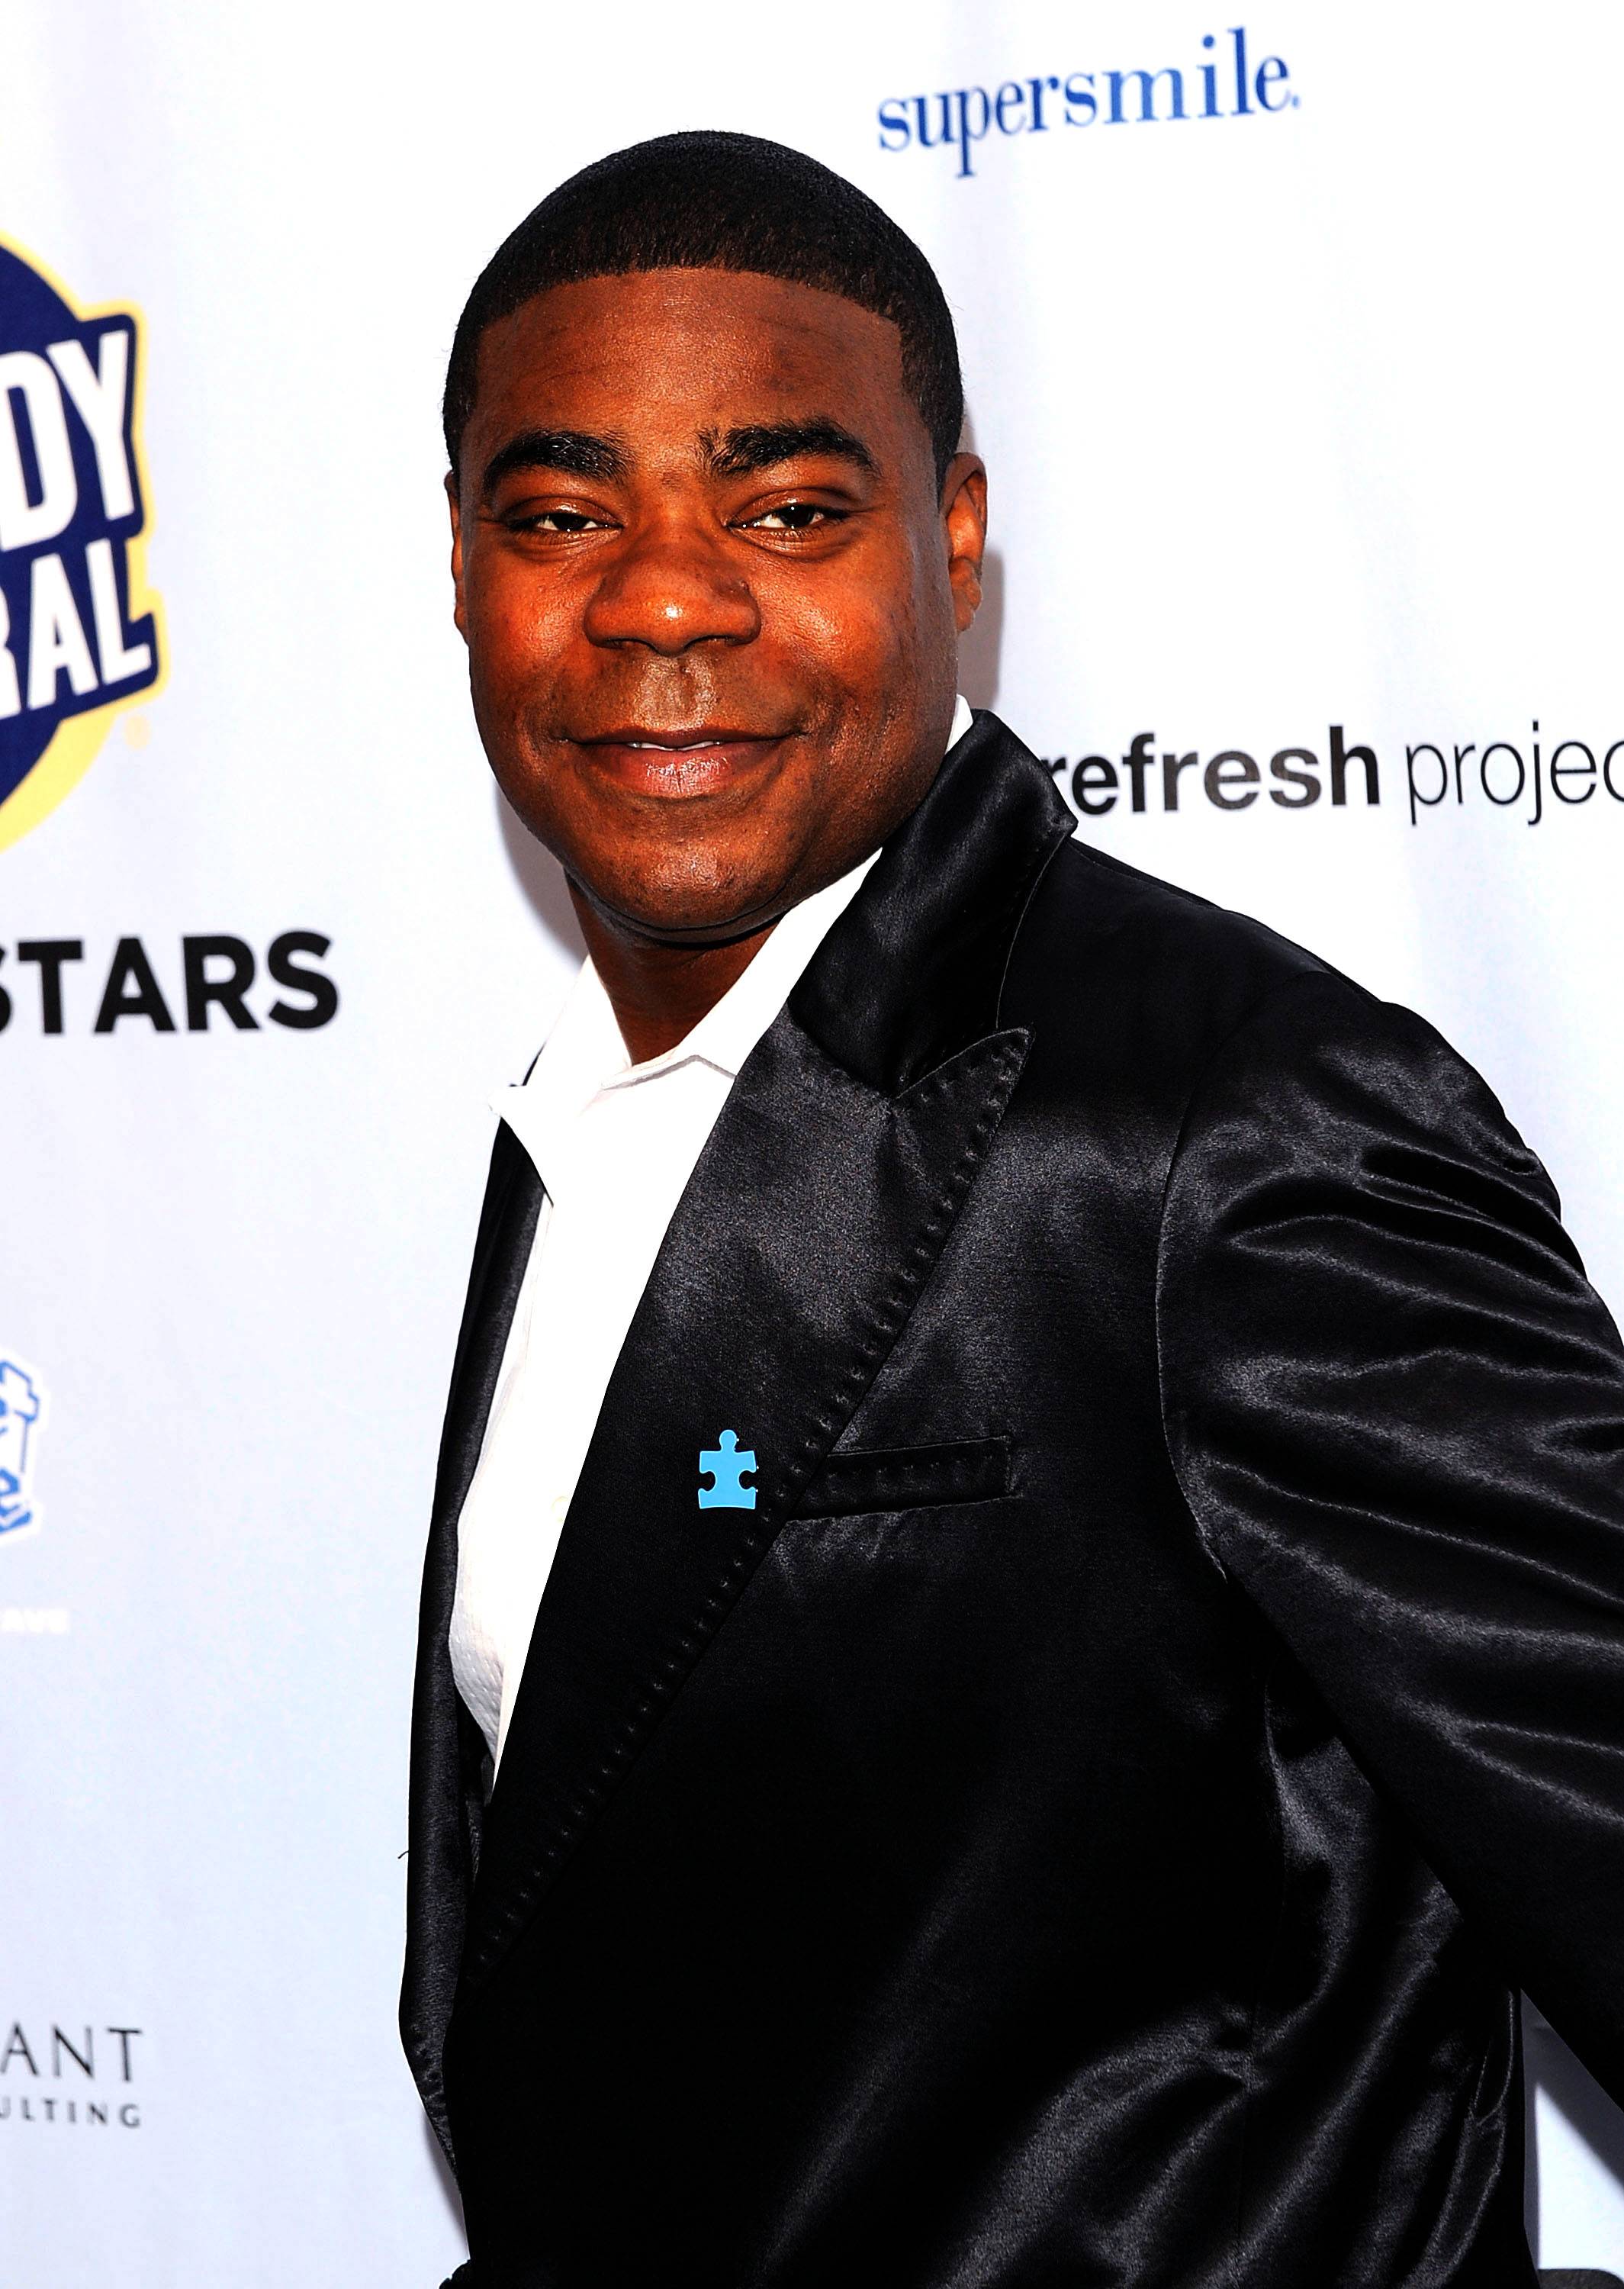 Tracy Morgan: November 10 - The comedian and 30 Rock star celebrates his 43rd birthday.(Photo: Andrew H. Walker/Getty Images)